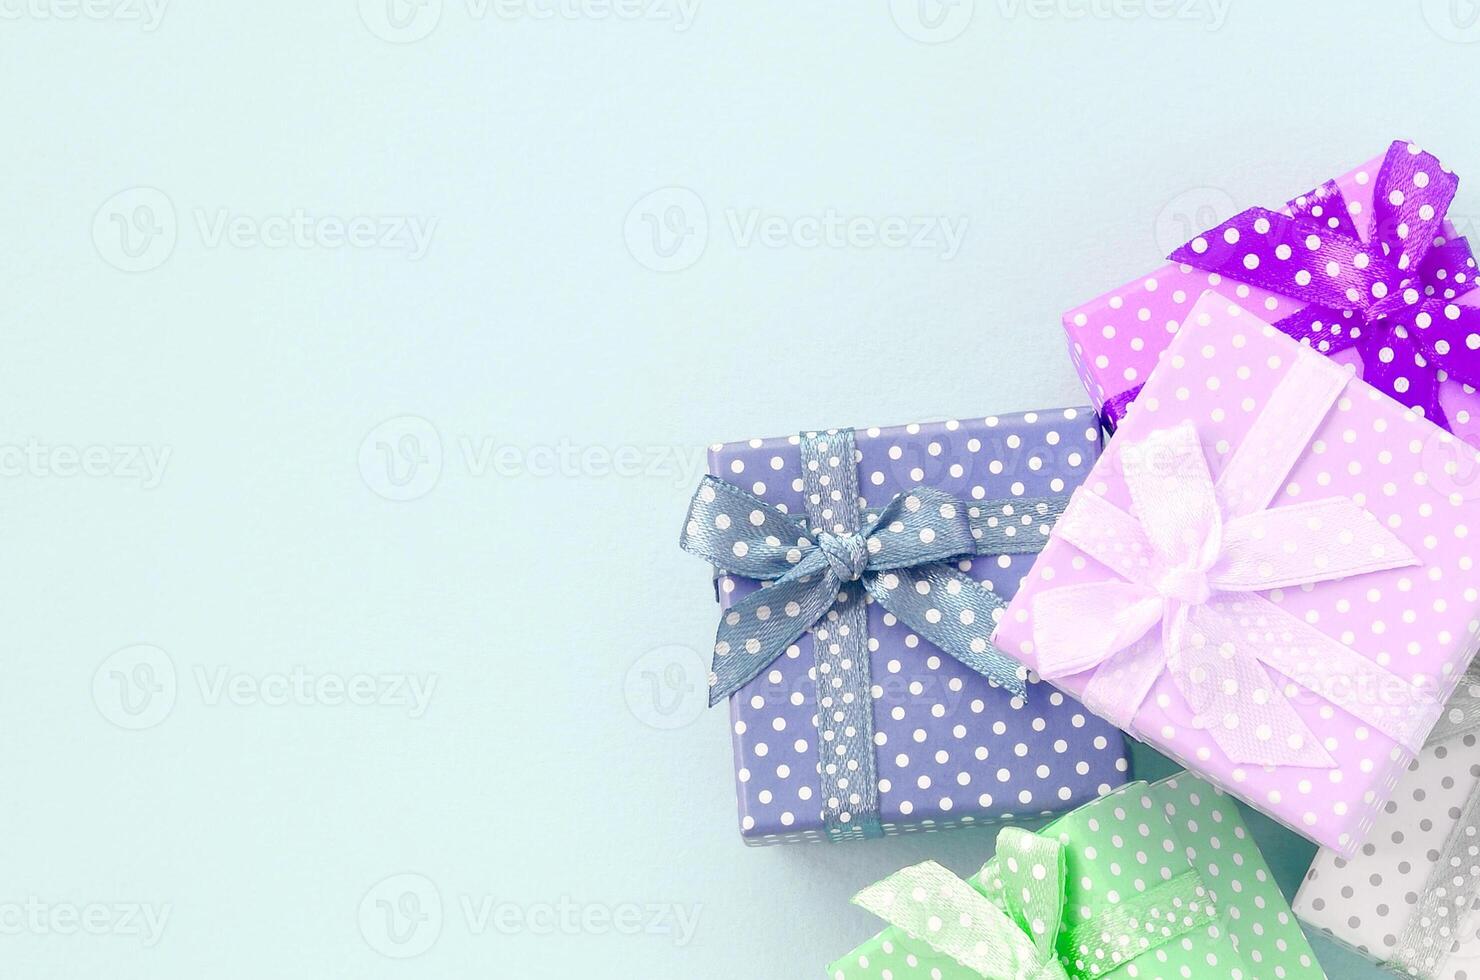 Pile of a small colored gift boxes with ribbons lies on a violet background. Minimalism flat lay top view photo